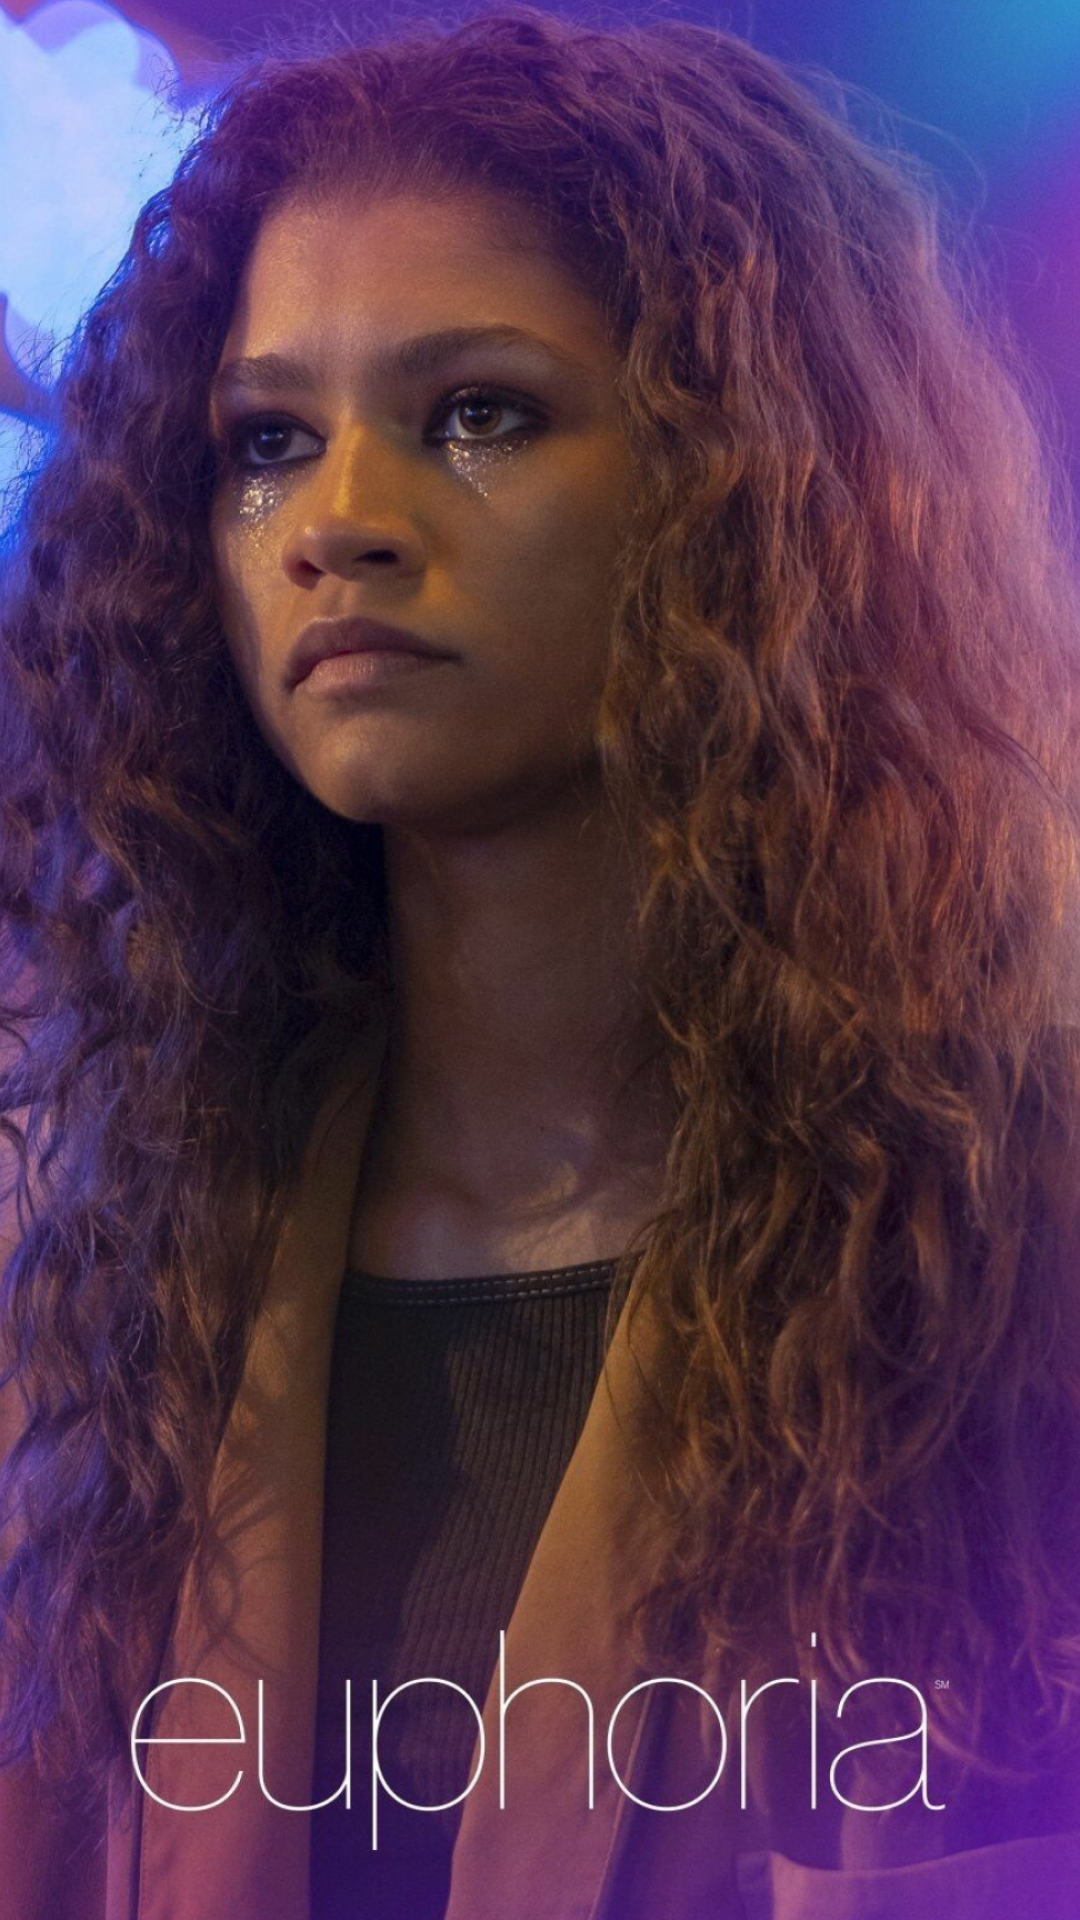 Euphoria (TV Series): Zendaya, Received various accolades, including two Primetime Emmy Awards. 1080x1920 Full HD Wallpaper.